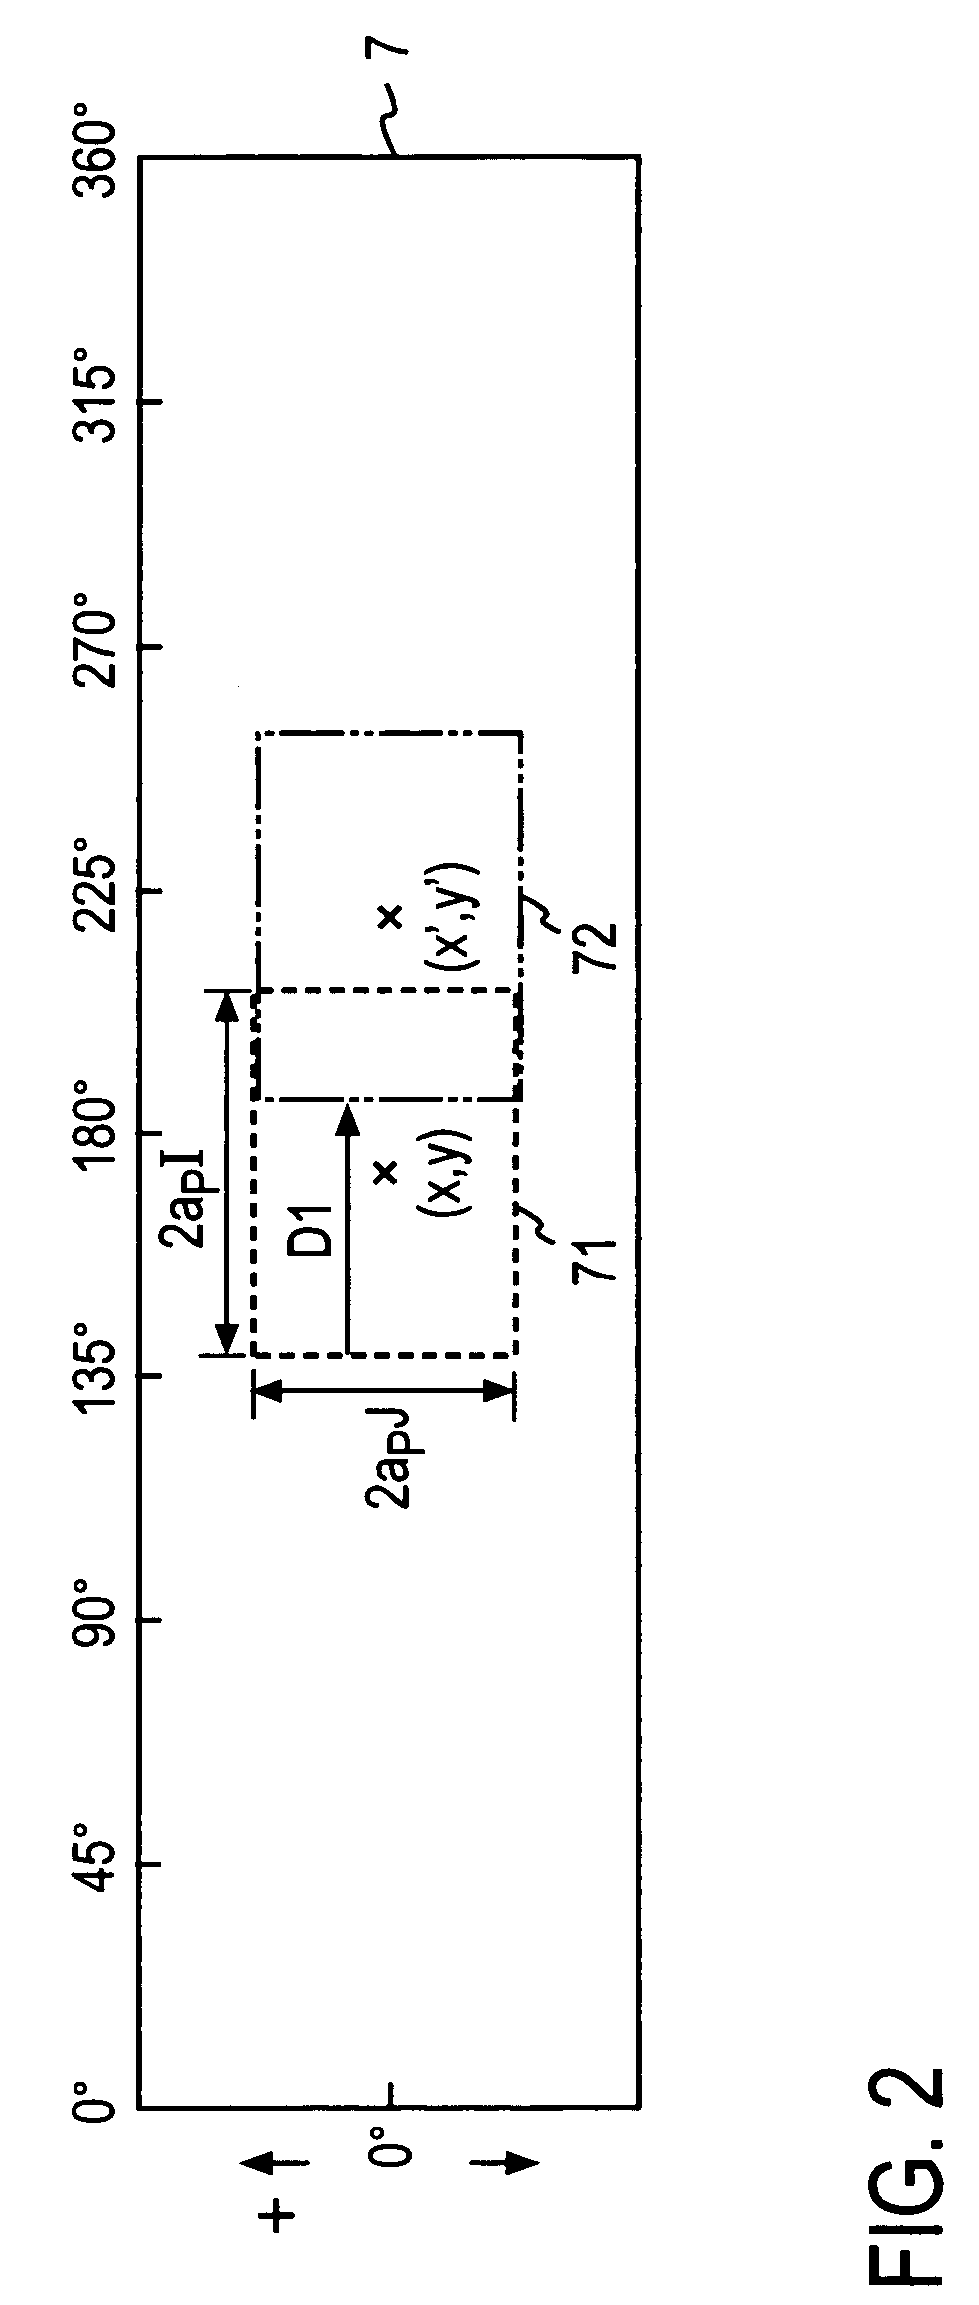 Remote image display method, image capturing device, and method and program therefor